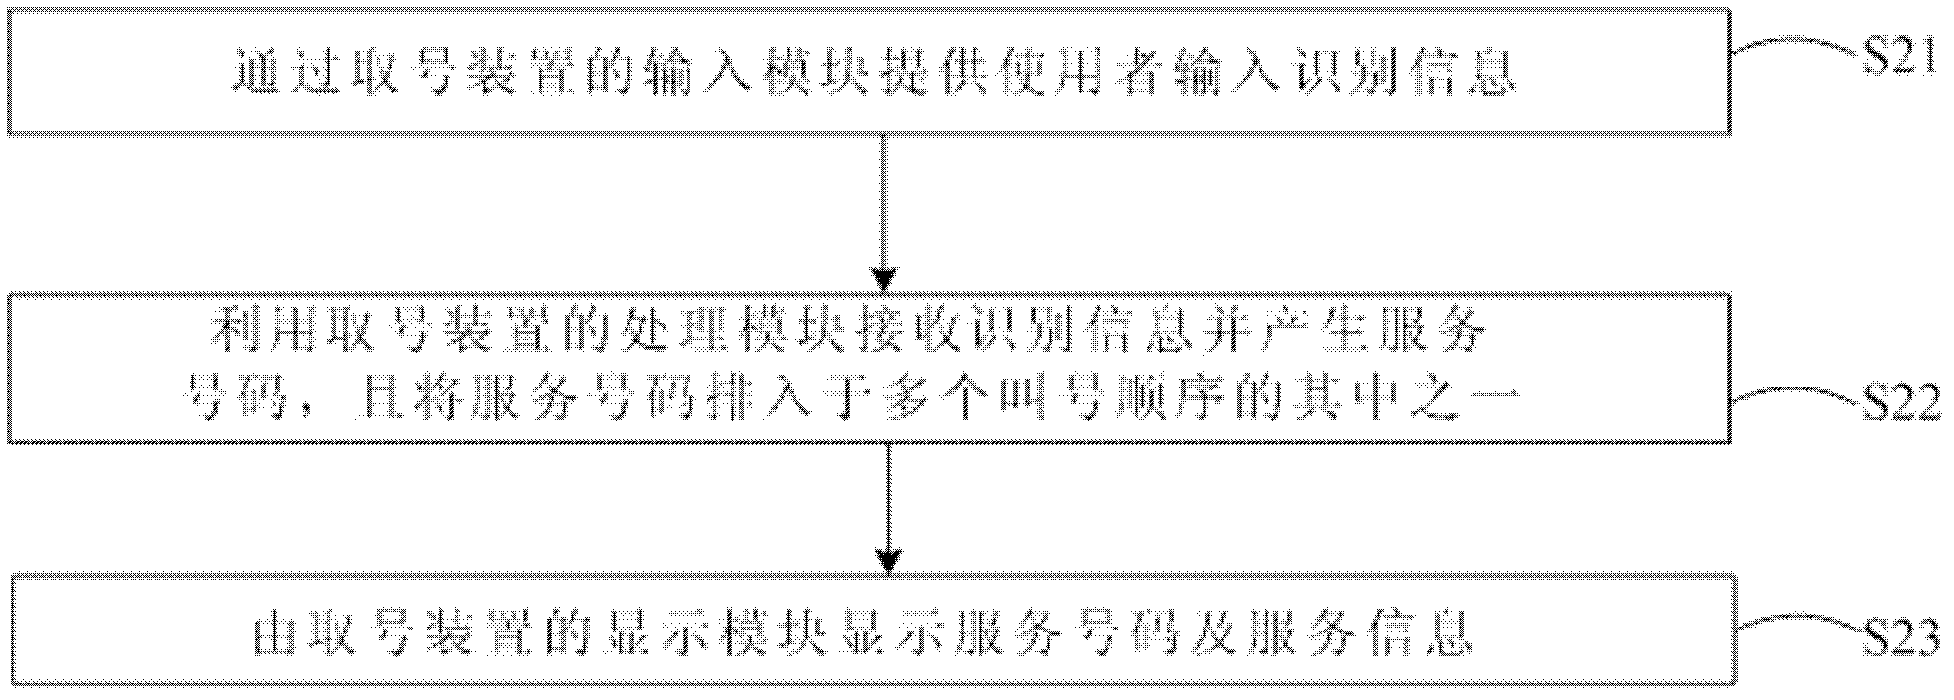 Non-paper number-fetching display system and non-paper number-fetching method